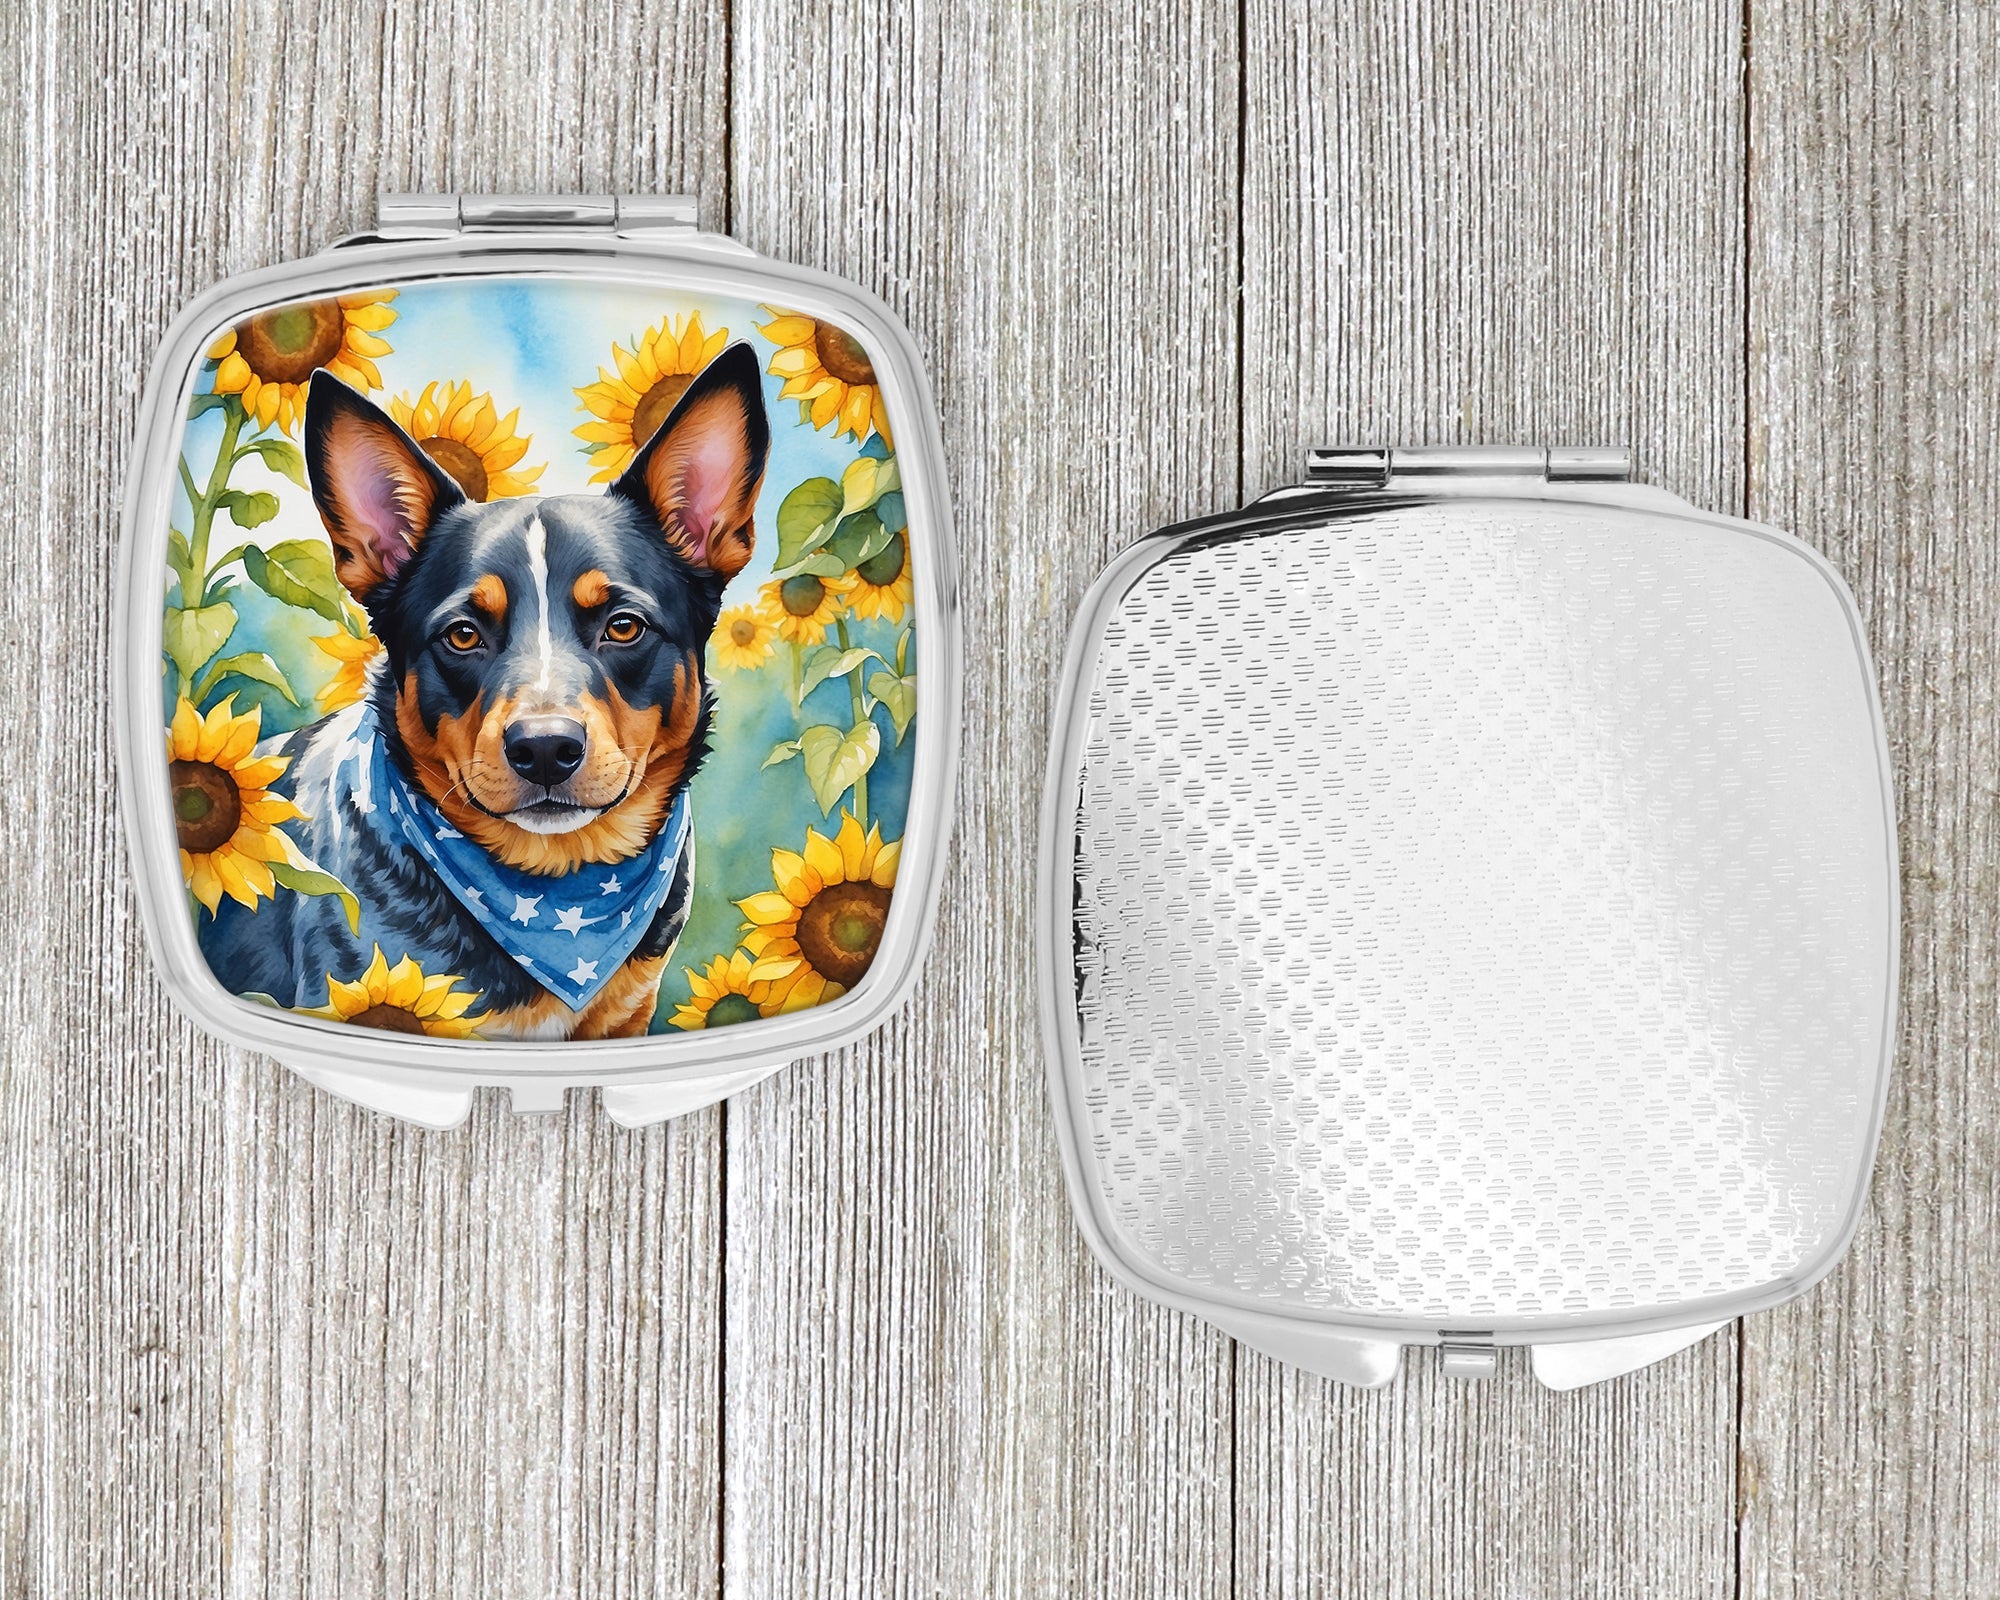 Australian Cattle Dog in Sunflowers Compact Mirror